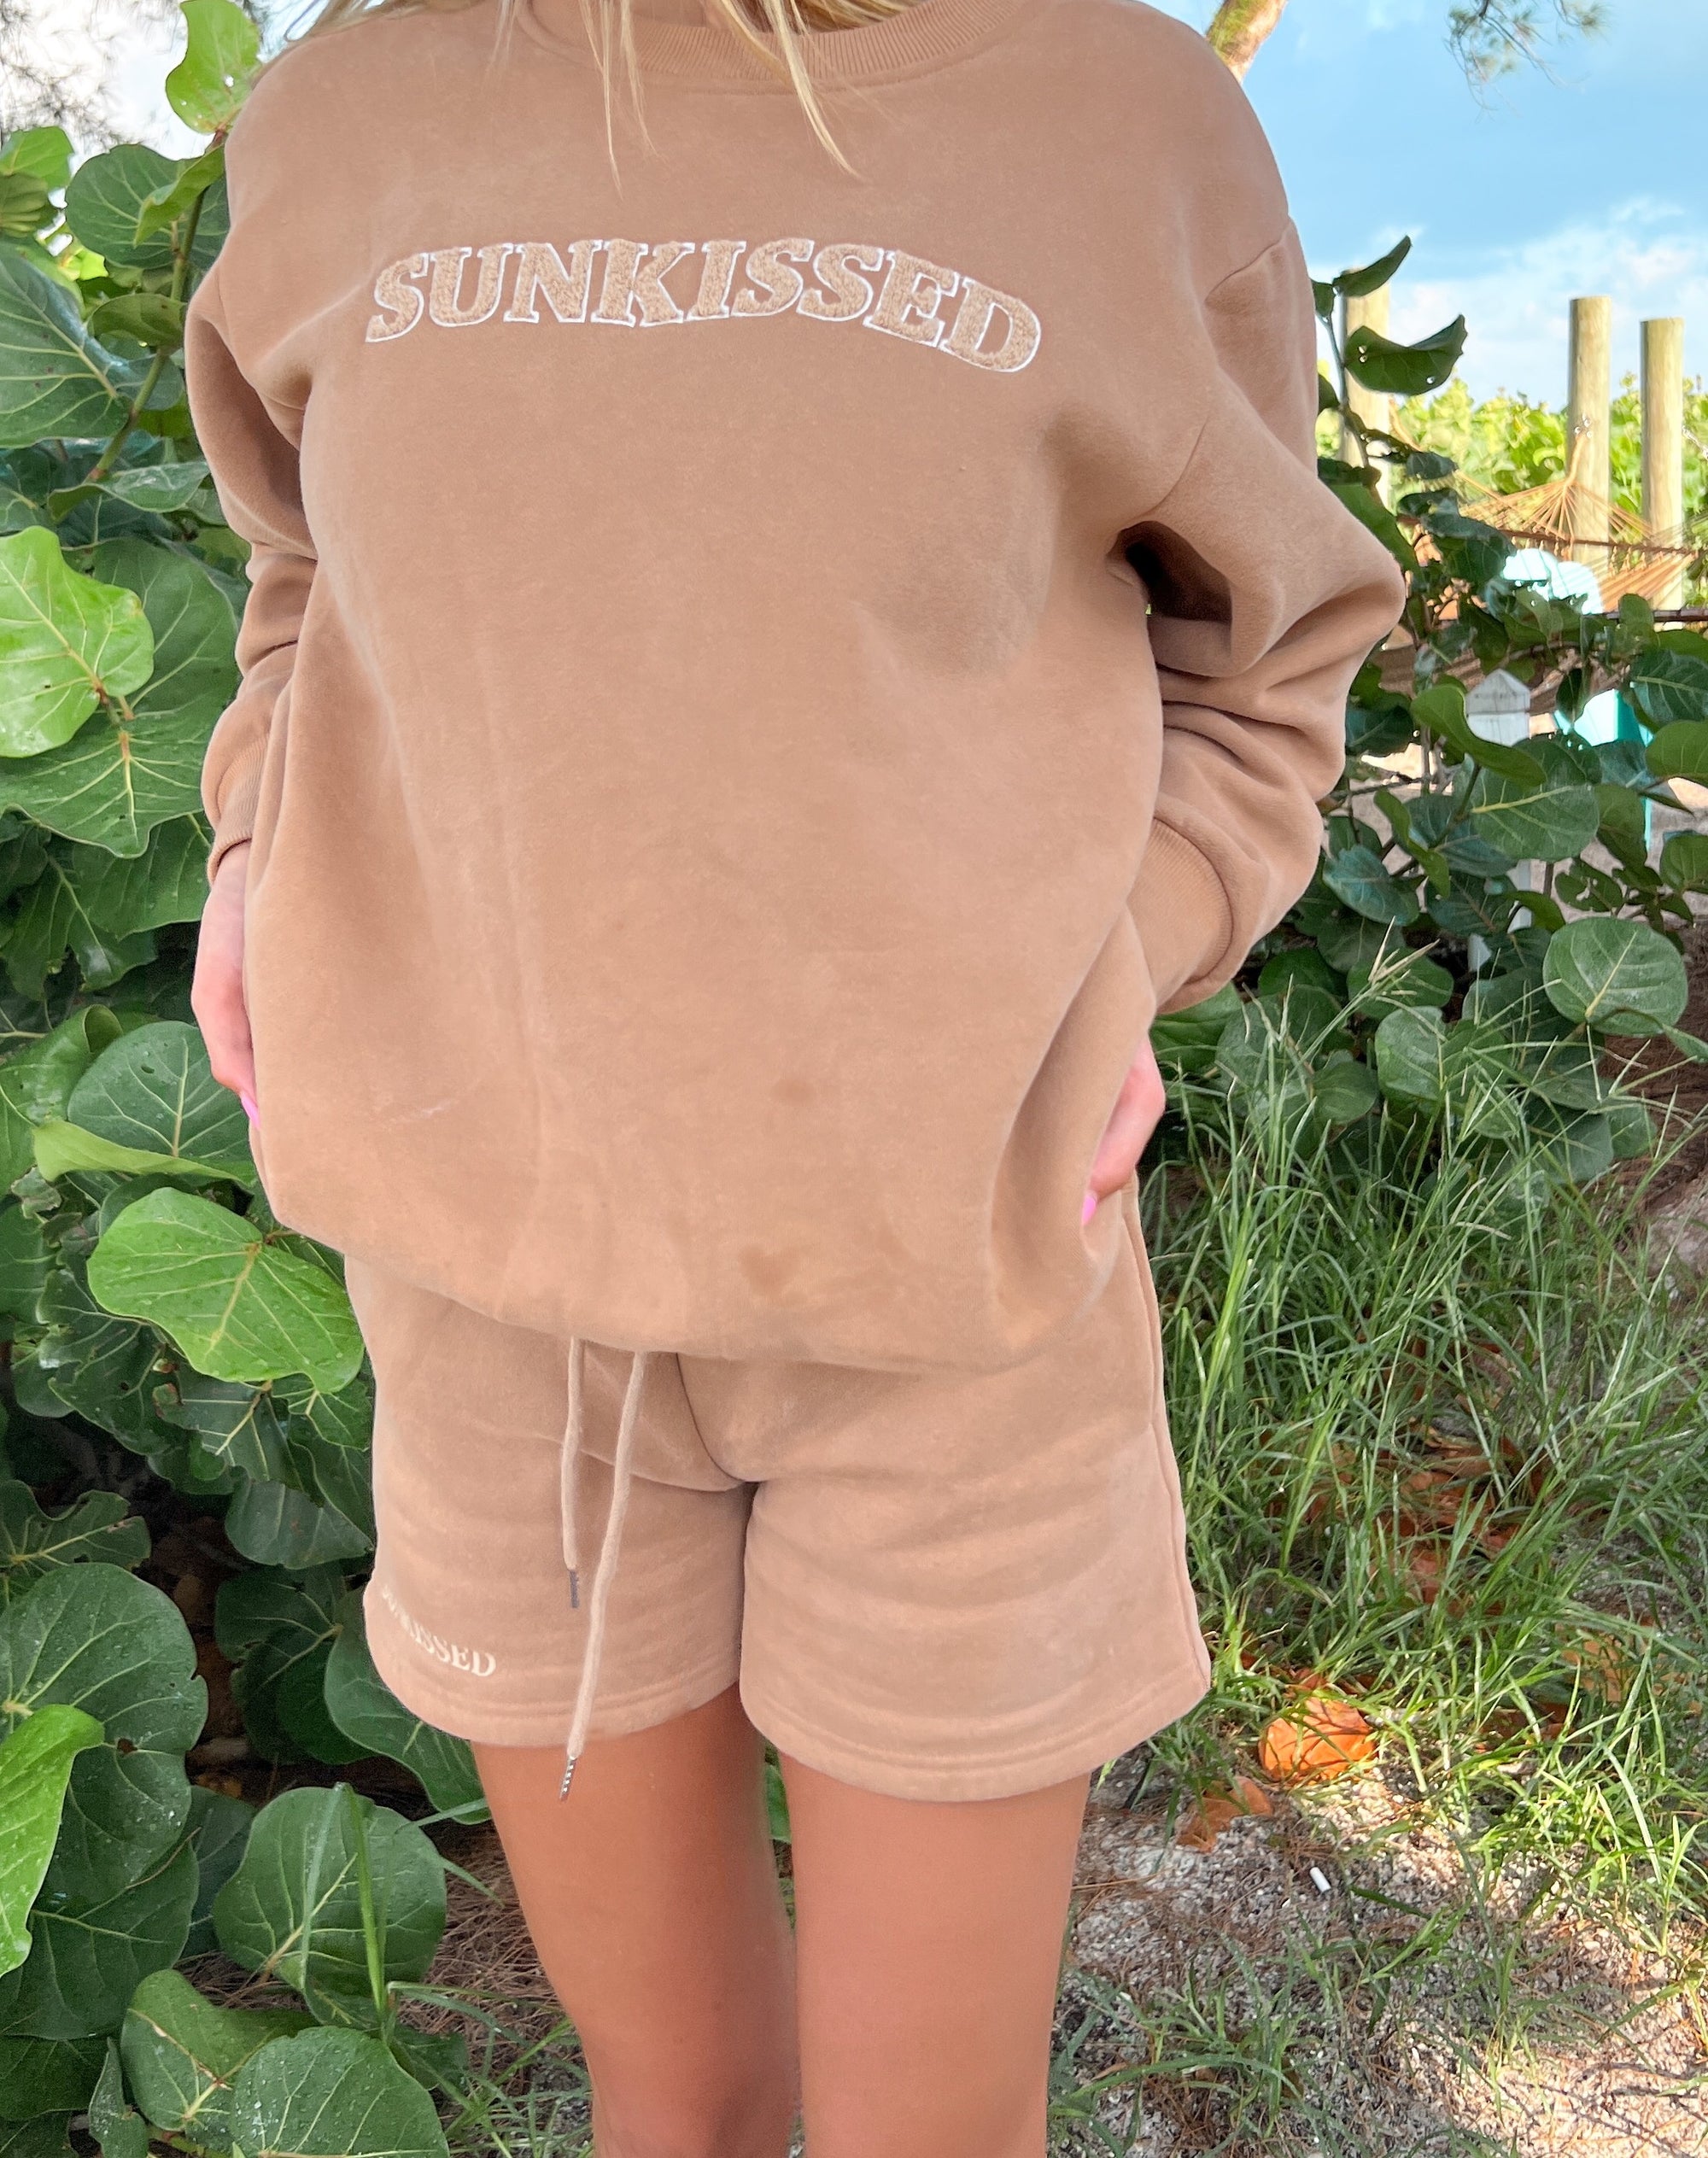 Chill Out Lounge Shorts Brown - Sunkissedcoconut